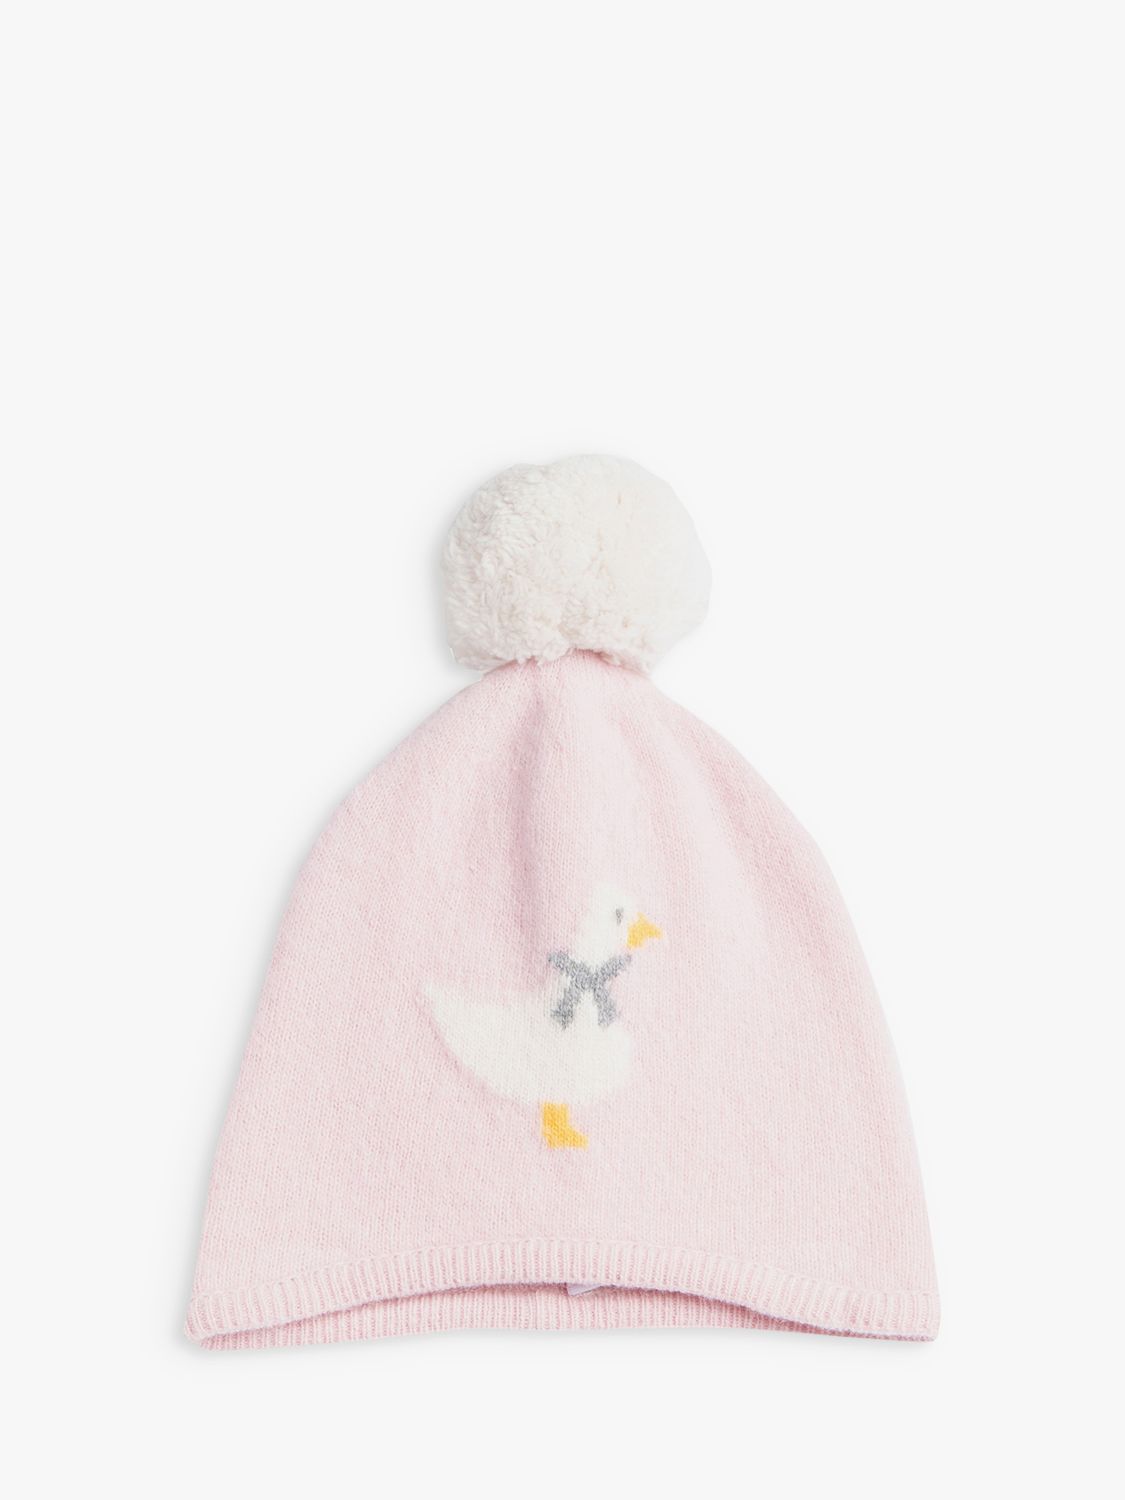 Buy Trotters Baby Jemima Bobble Hat, Pale Pink Online at johnlewis.com